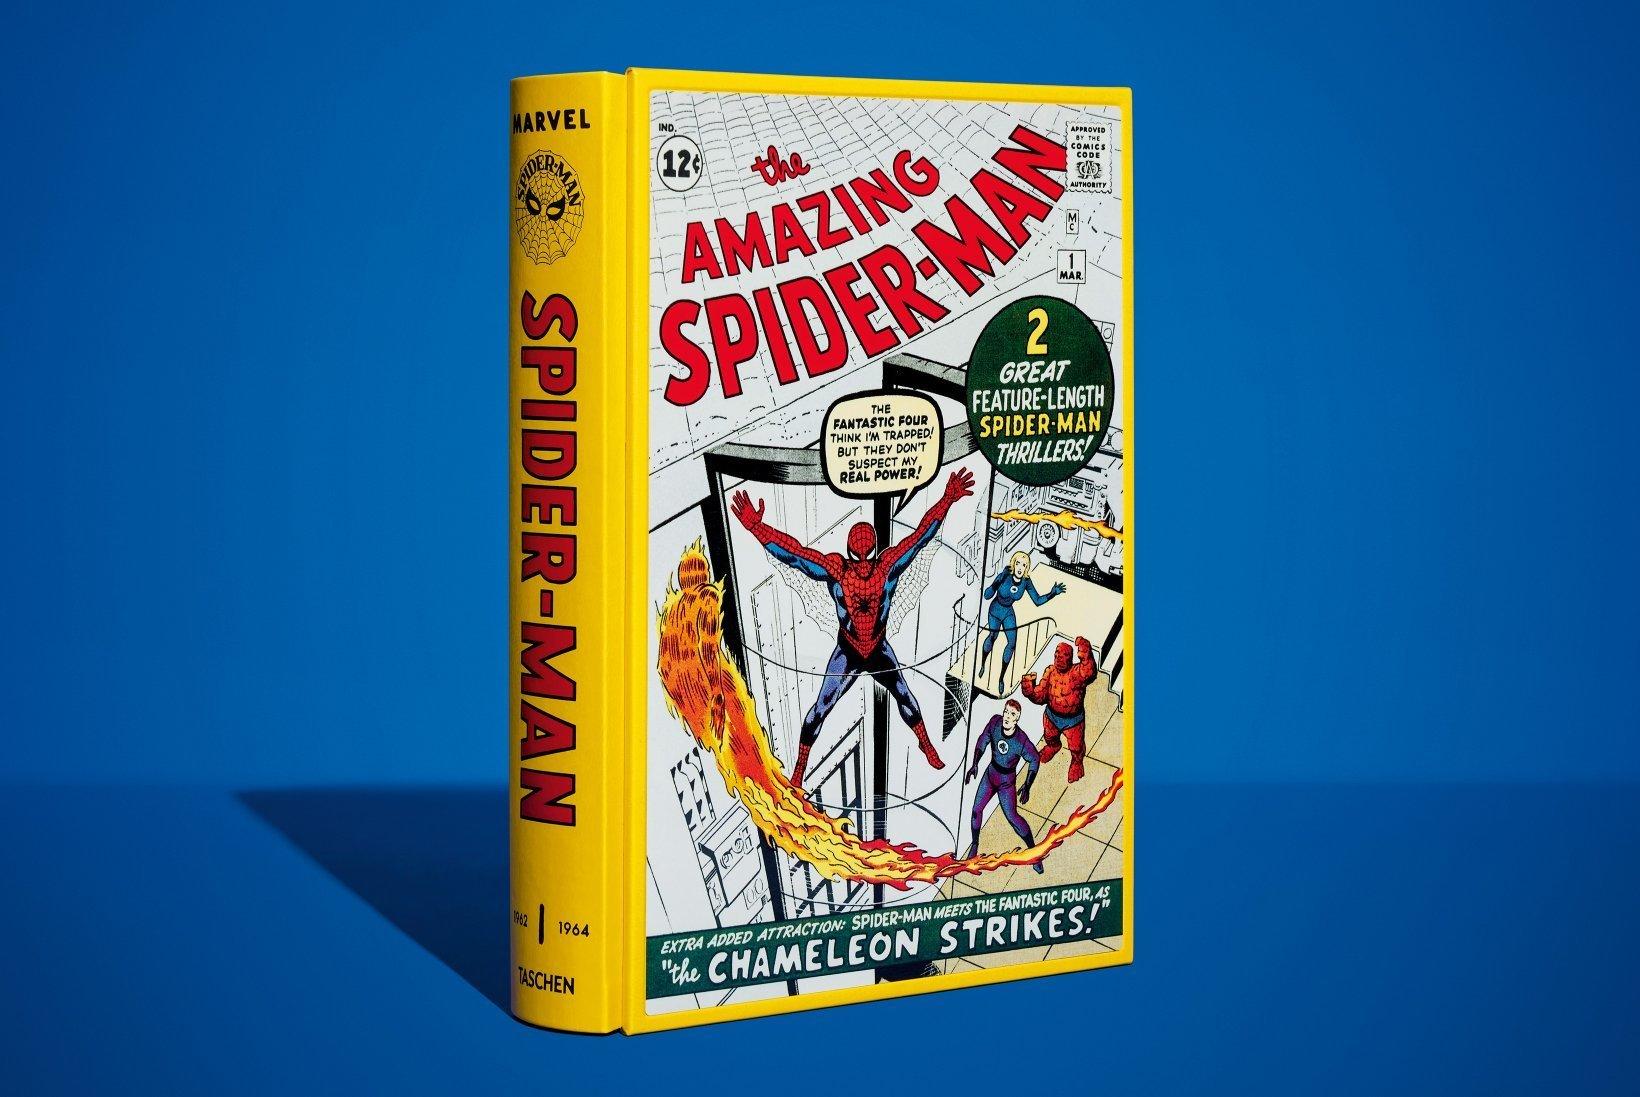 European The Marvel Comics Library, Spider-Man, Vol. 1. 1962–1964 Collector's Edition